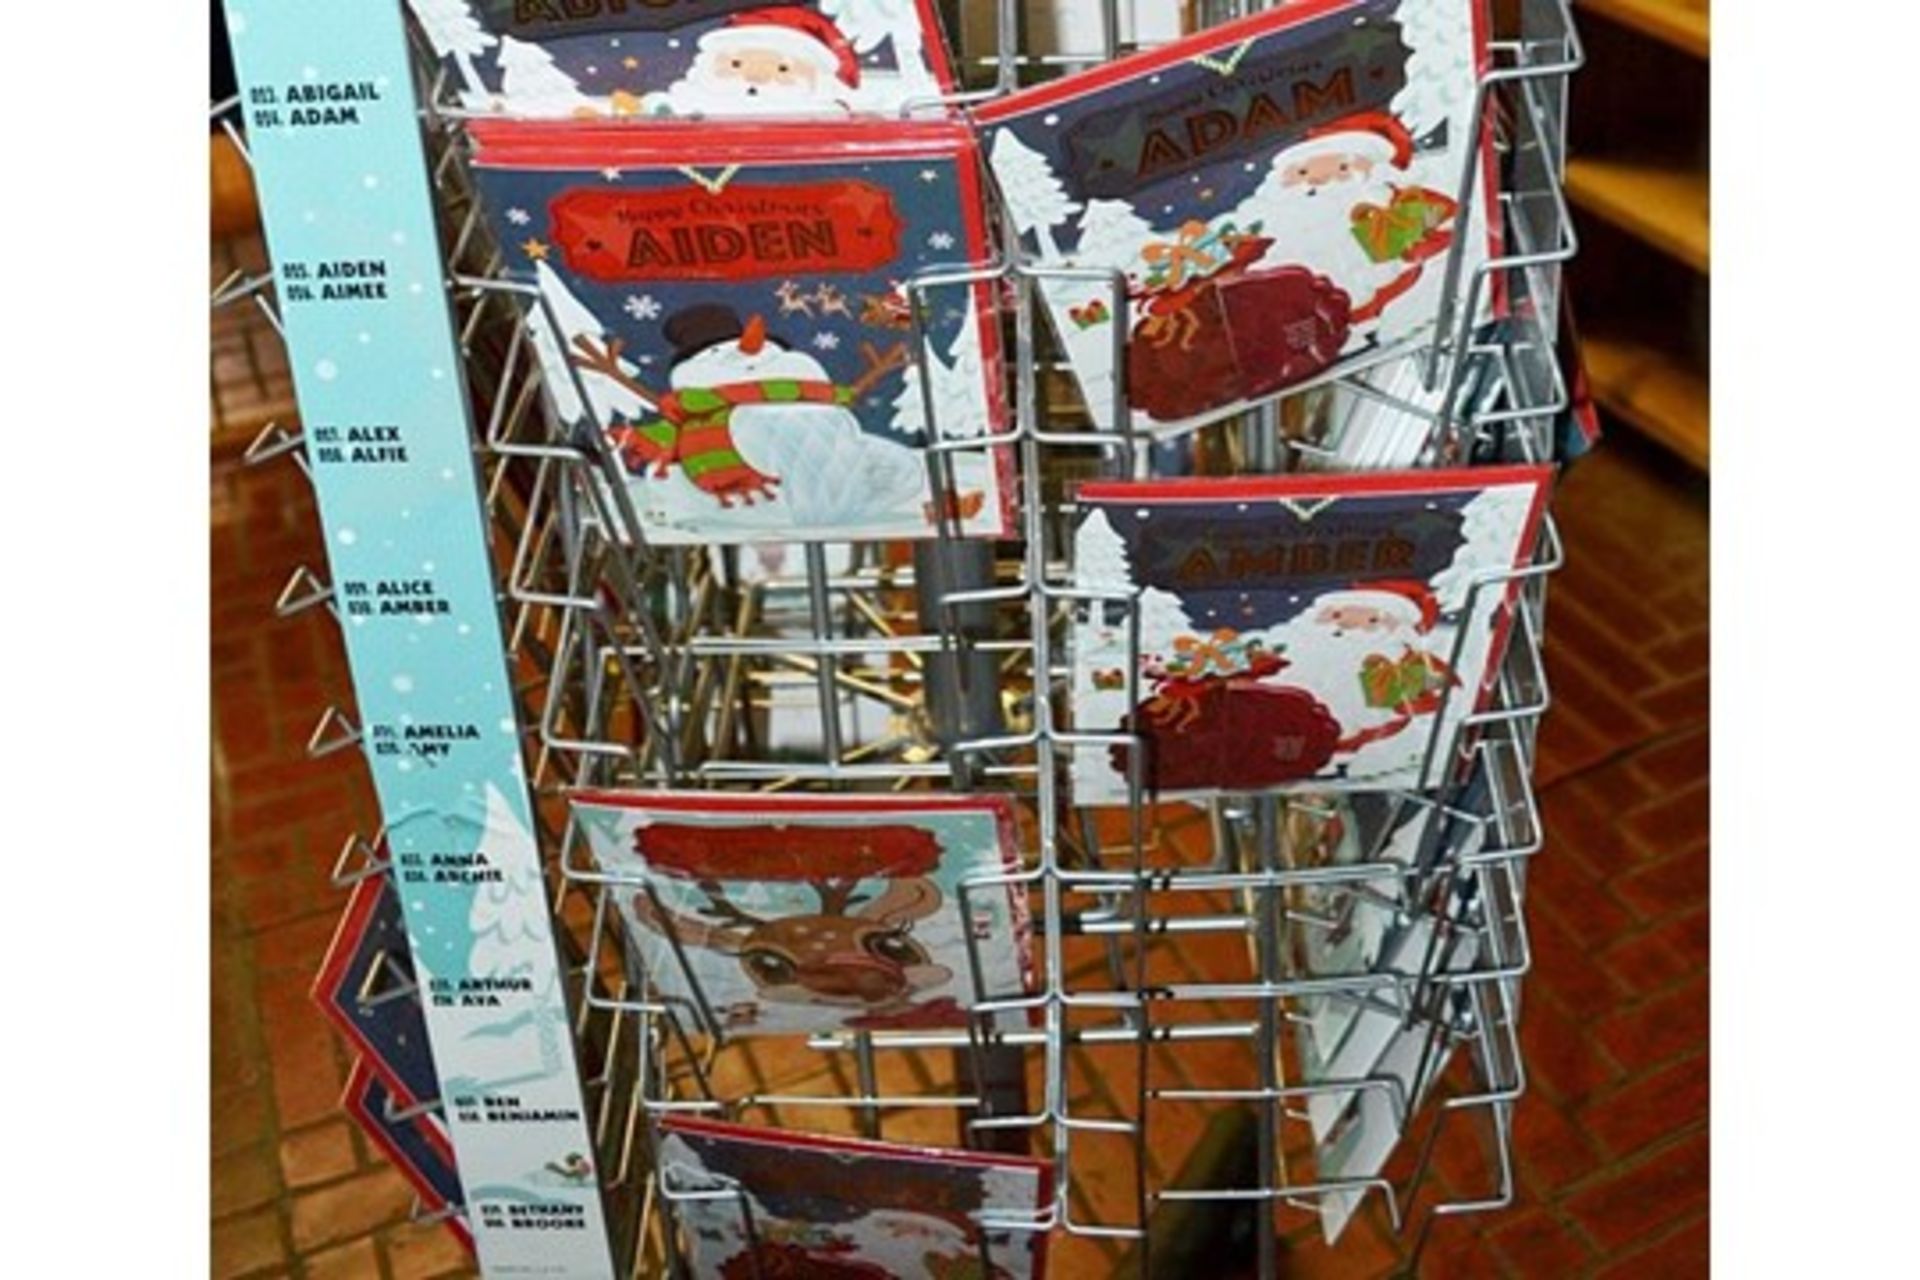 27 x Retail Carousel Display Stands With Approximately 2,800 Items of Resale Stock - Includes - Image 28 of 61